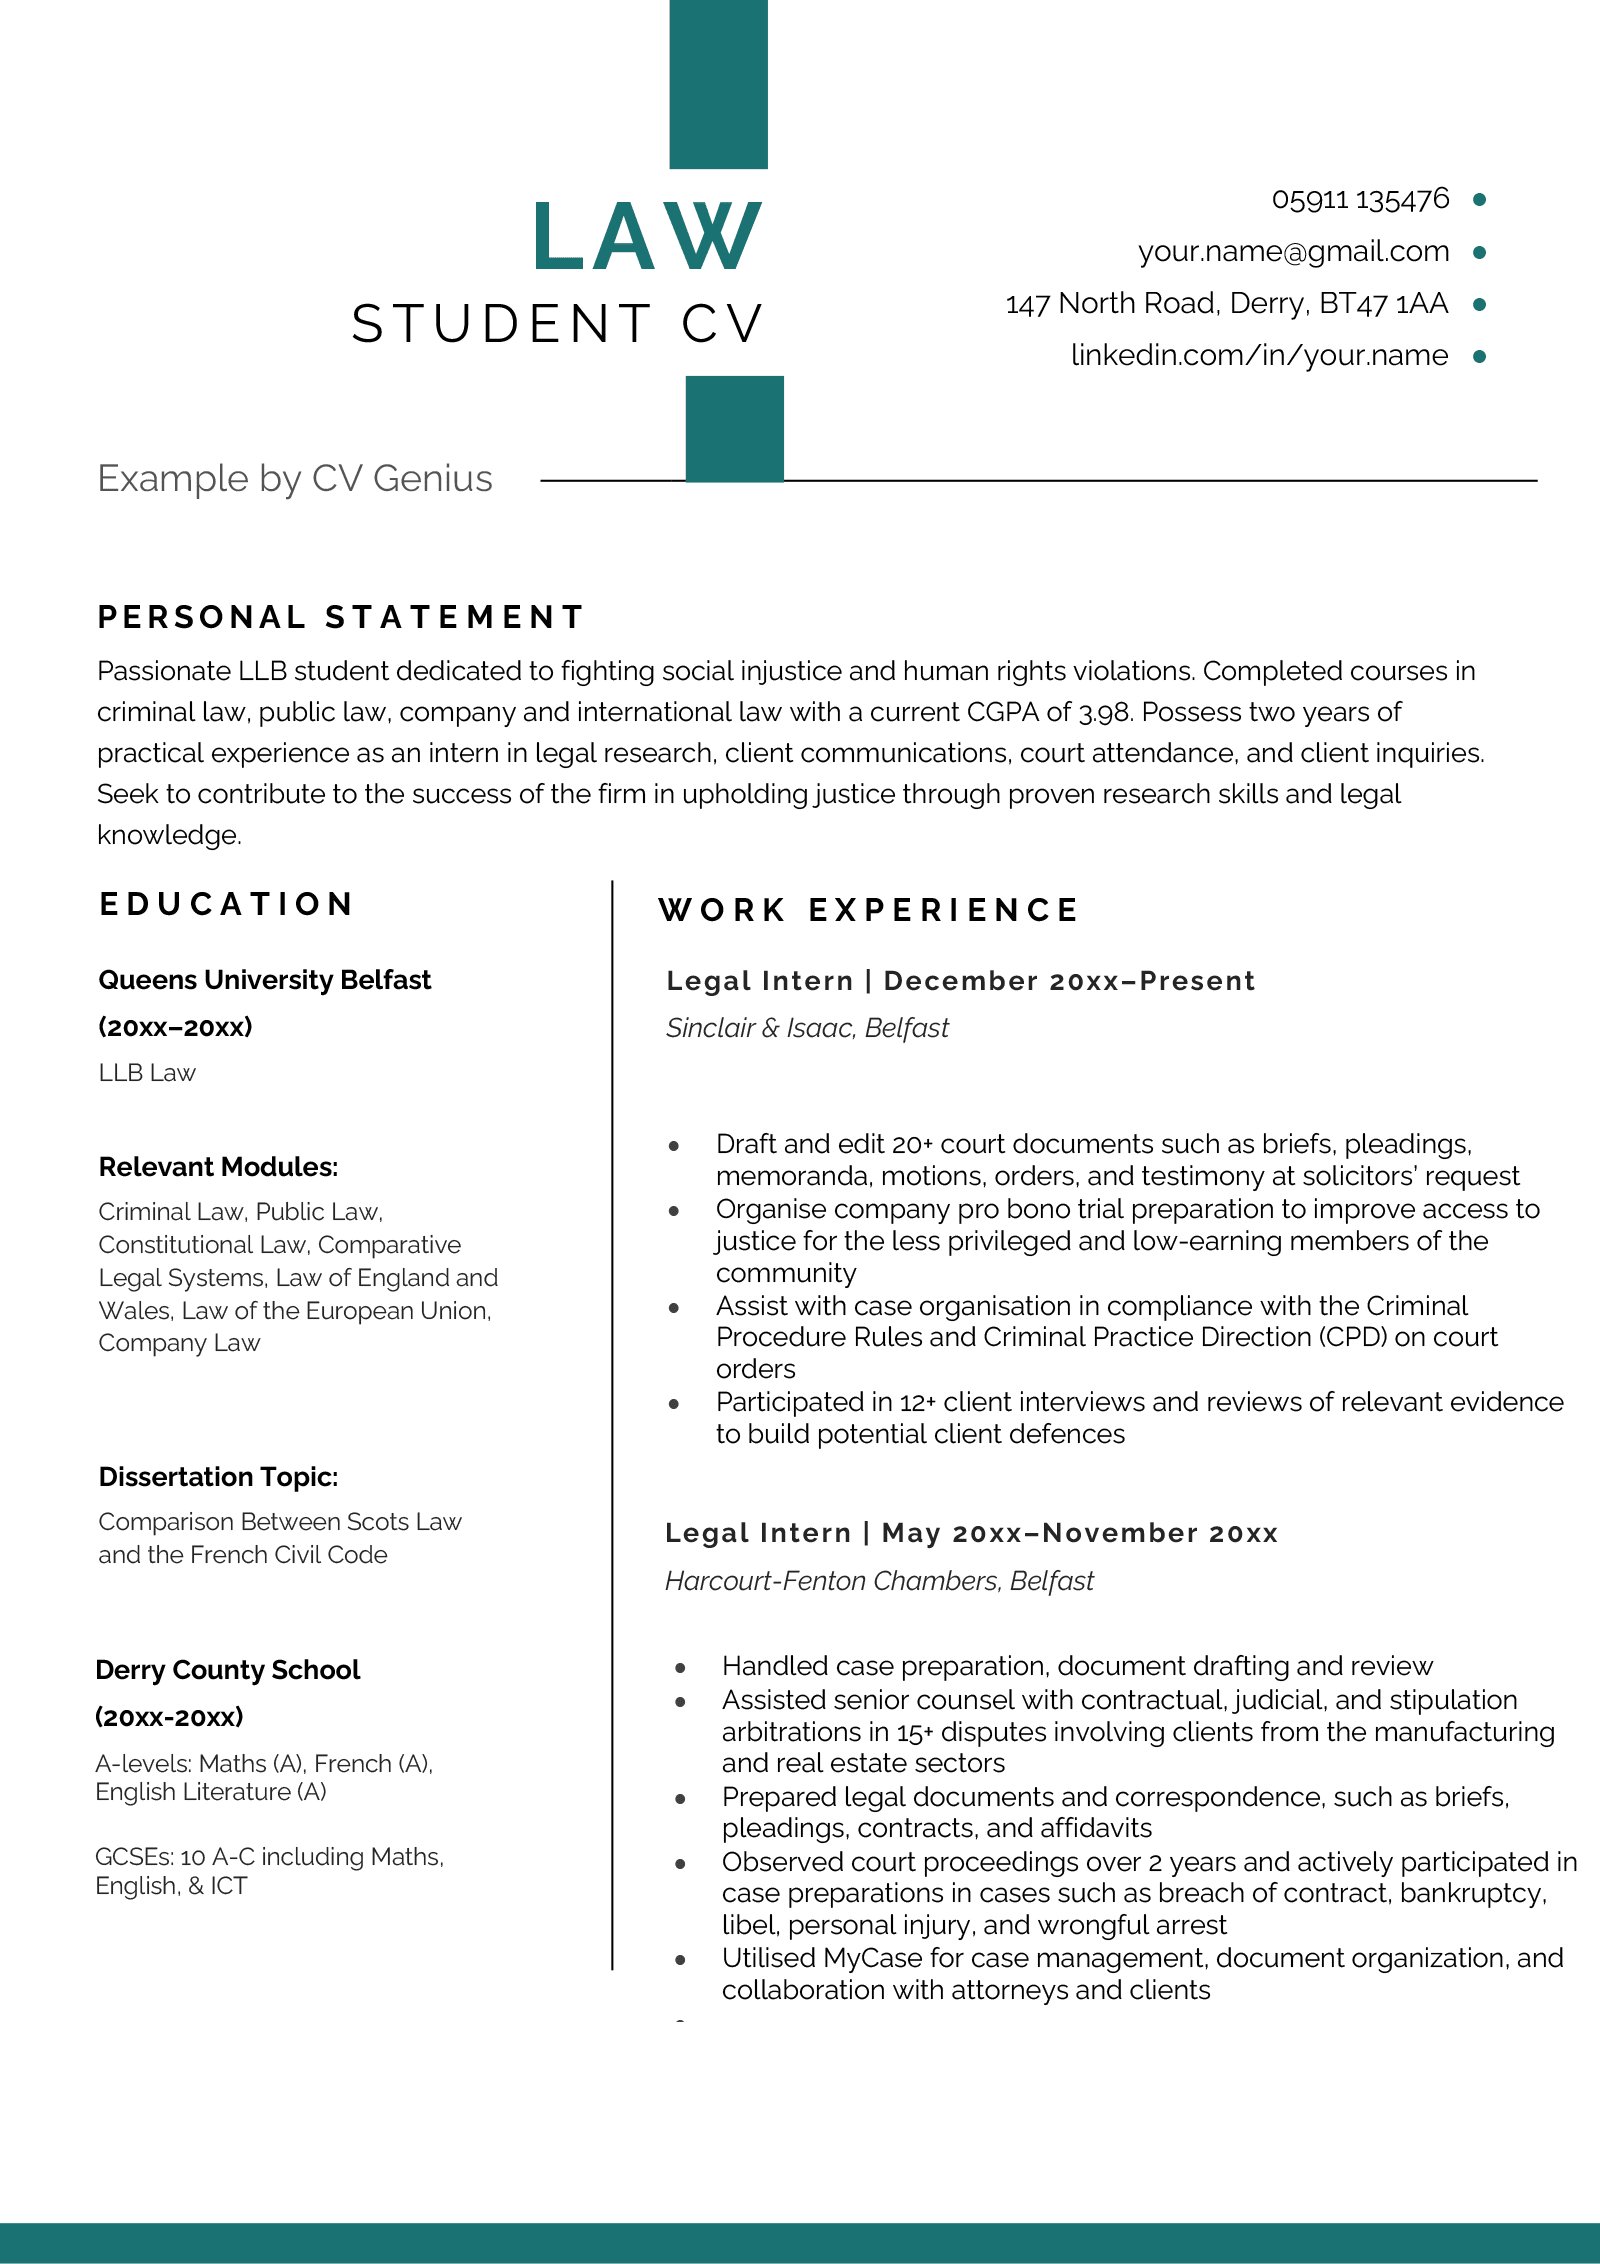 Law Student CV Example UK Template Free Download